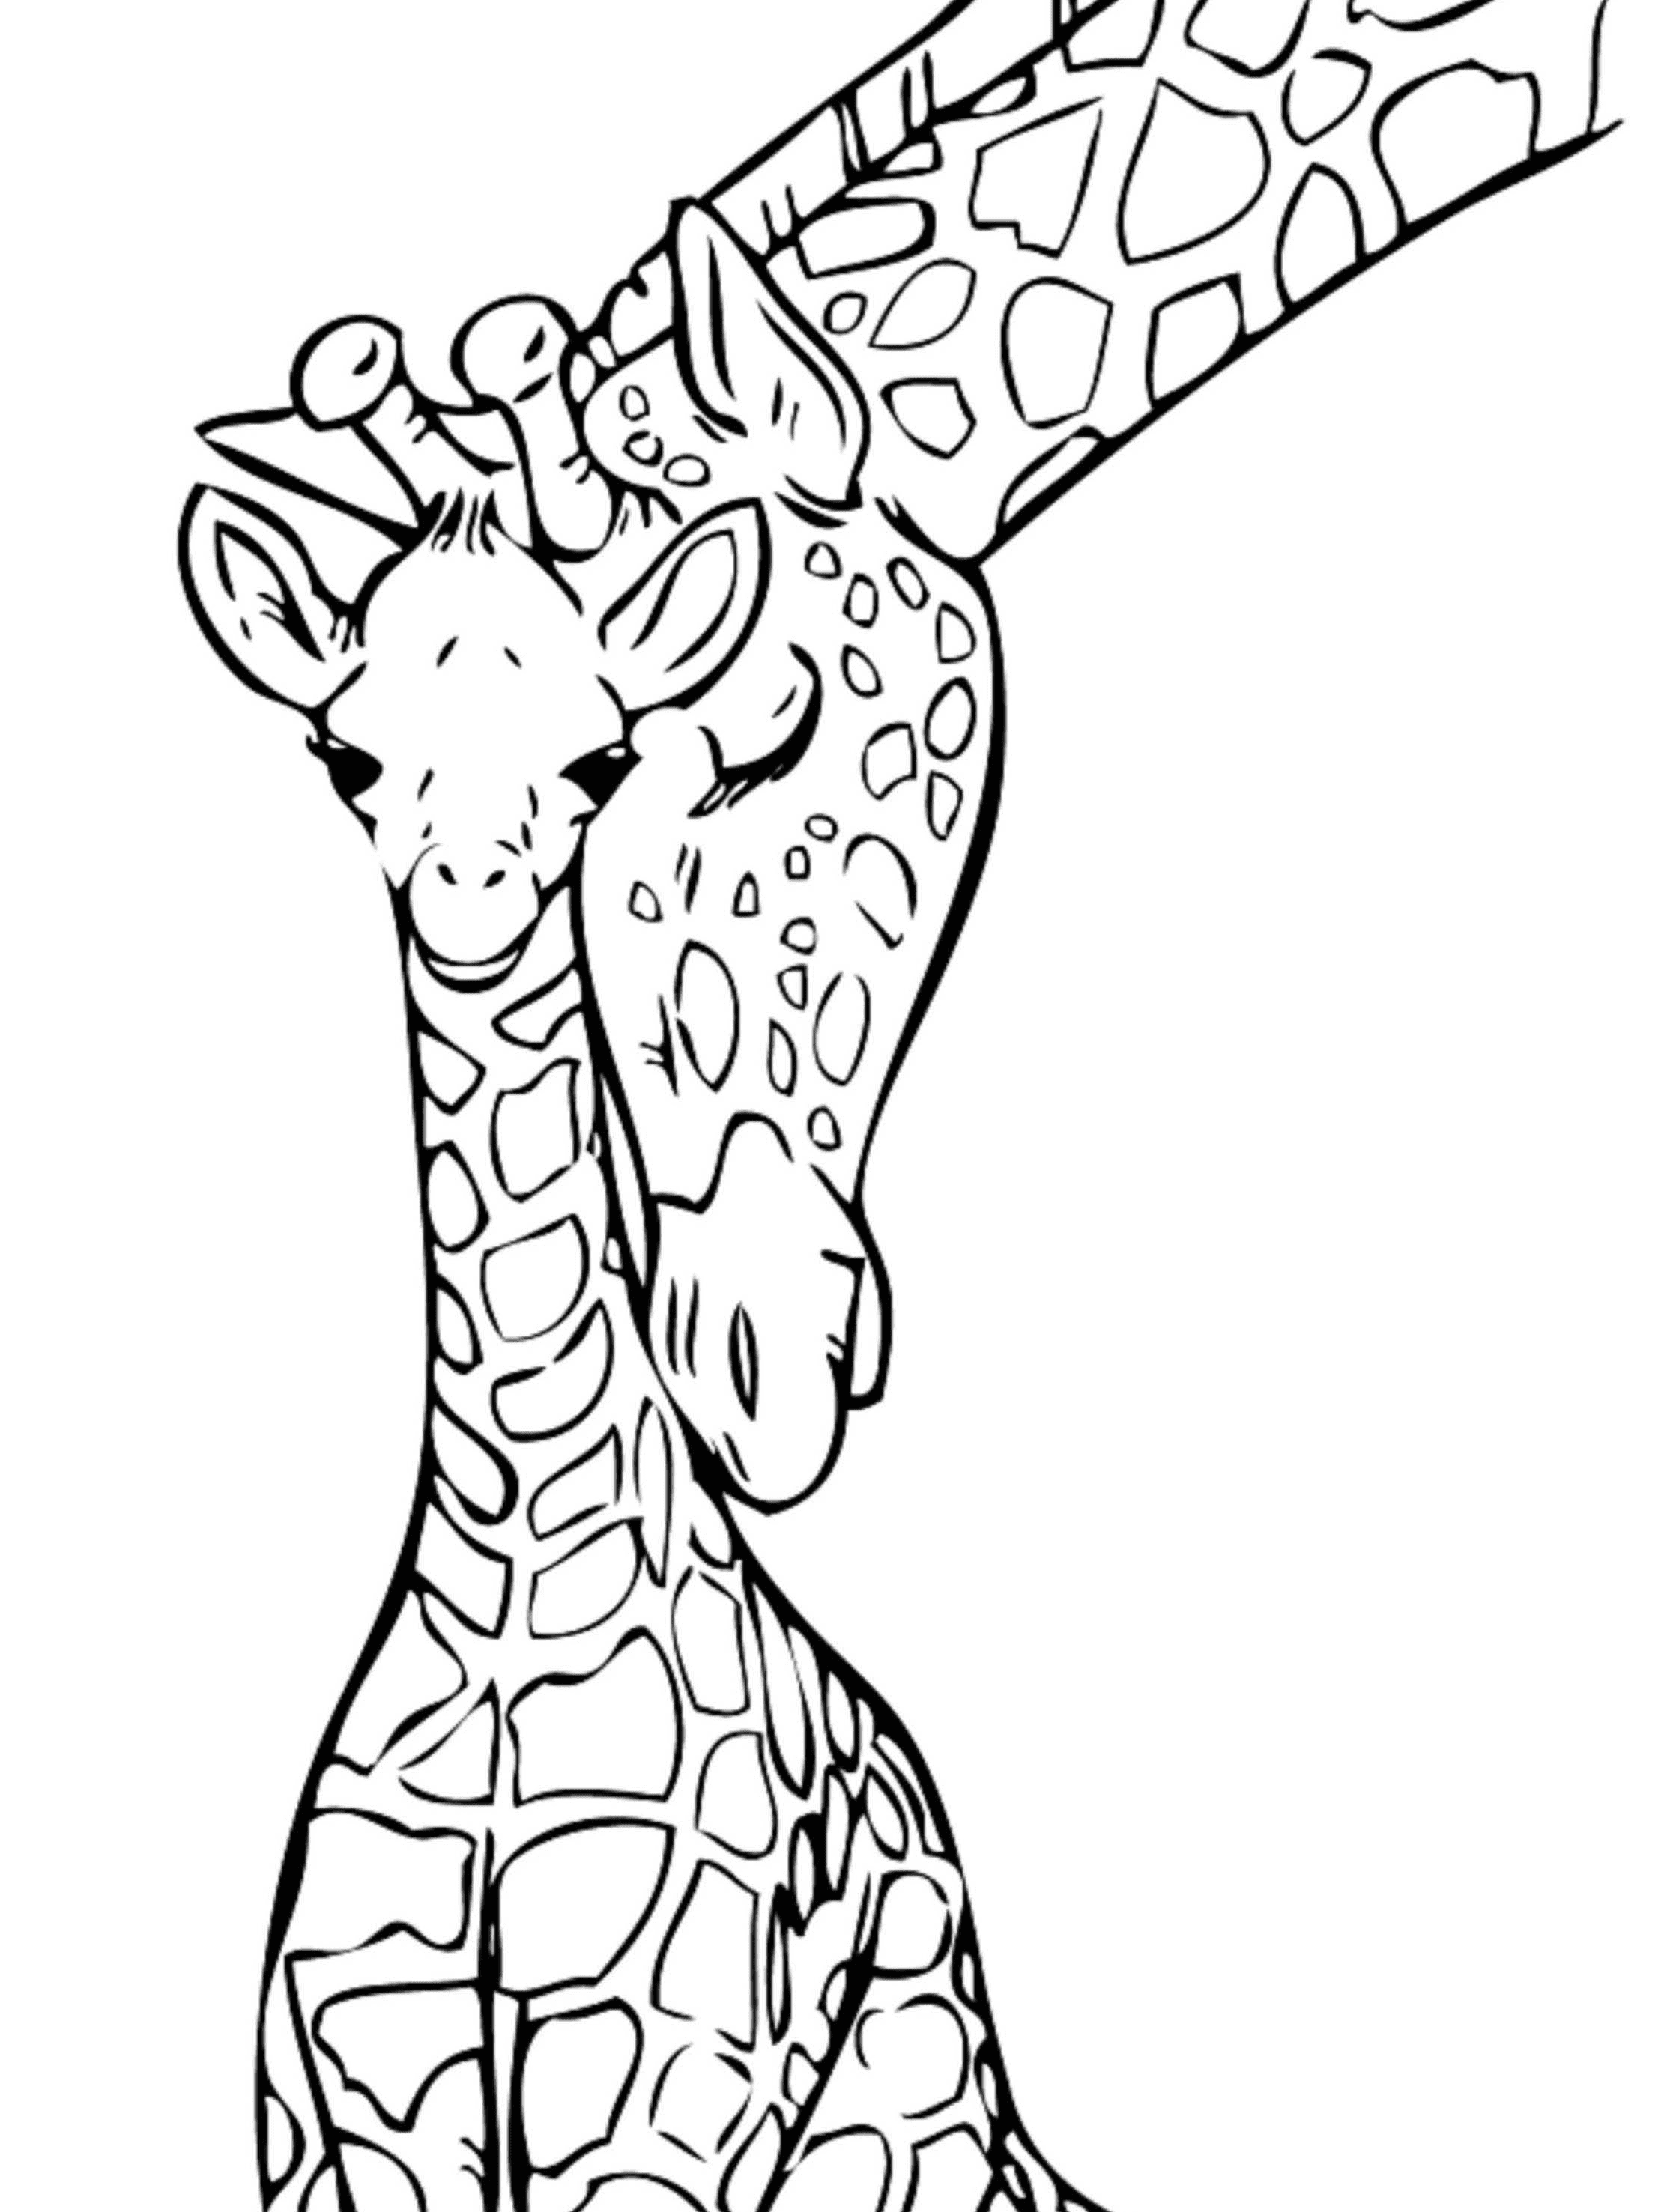 Giraffe Mother and Child Coloring Page